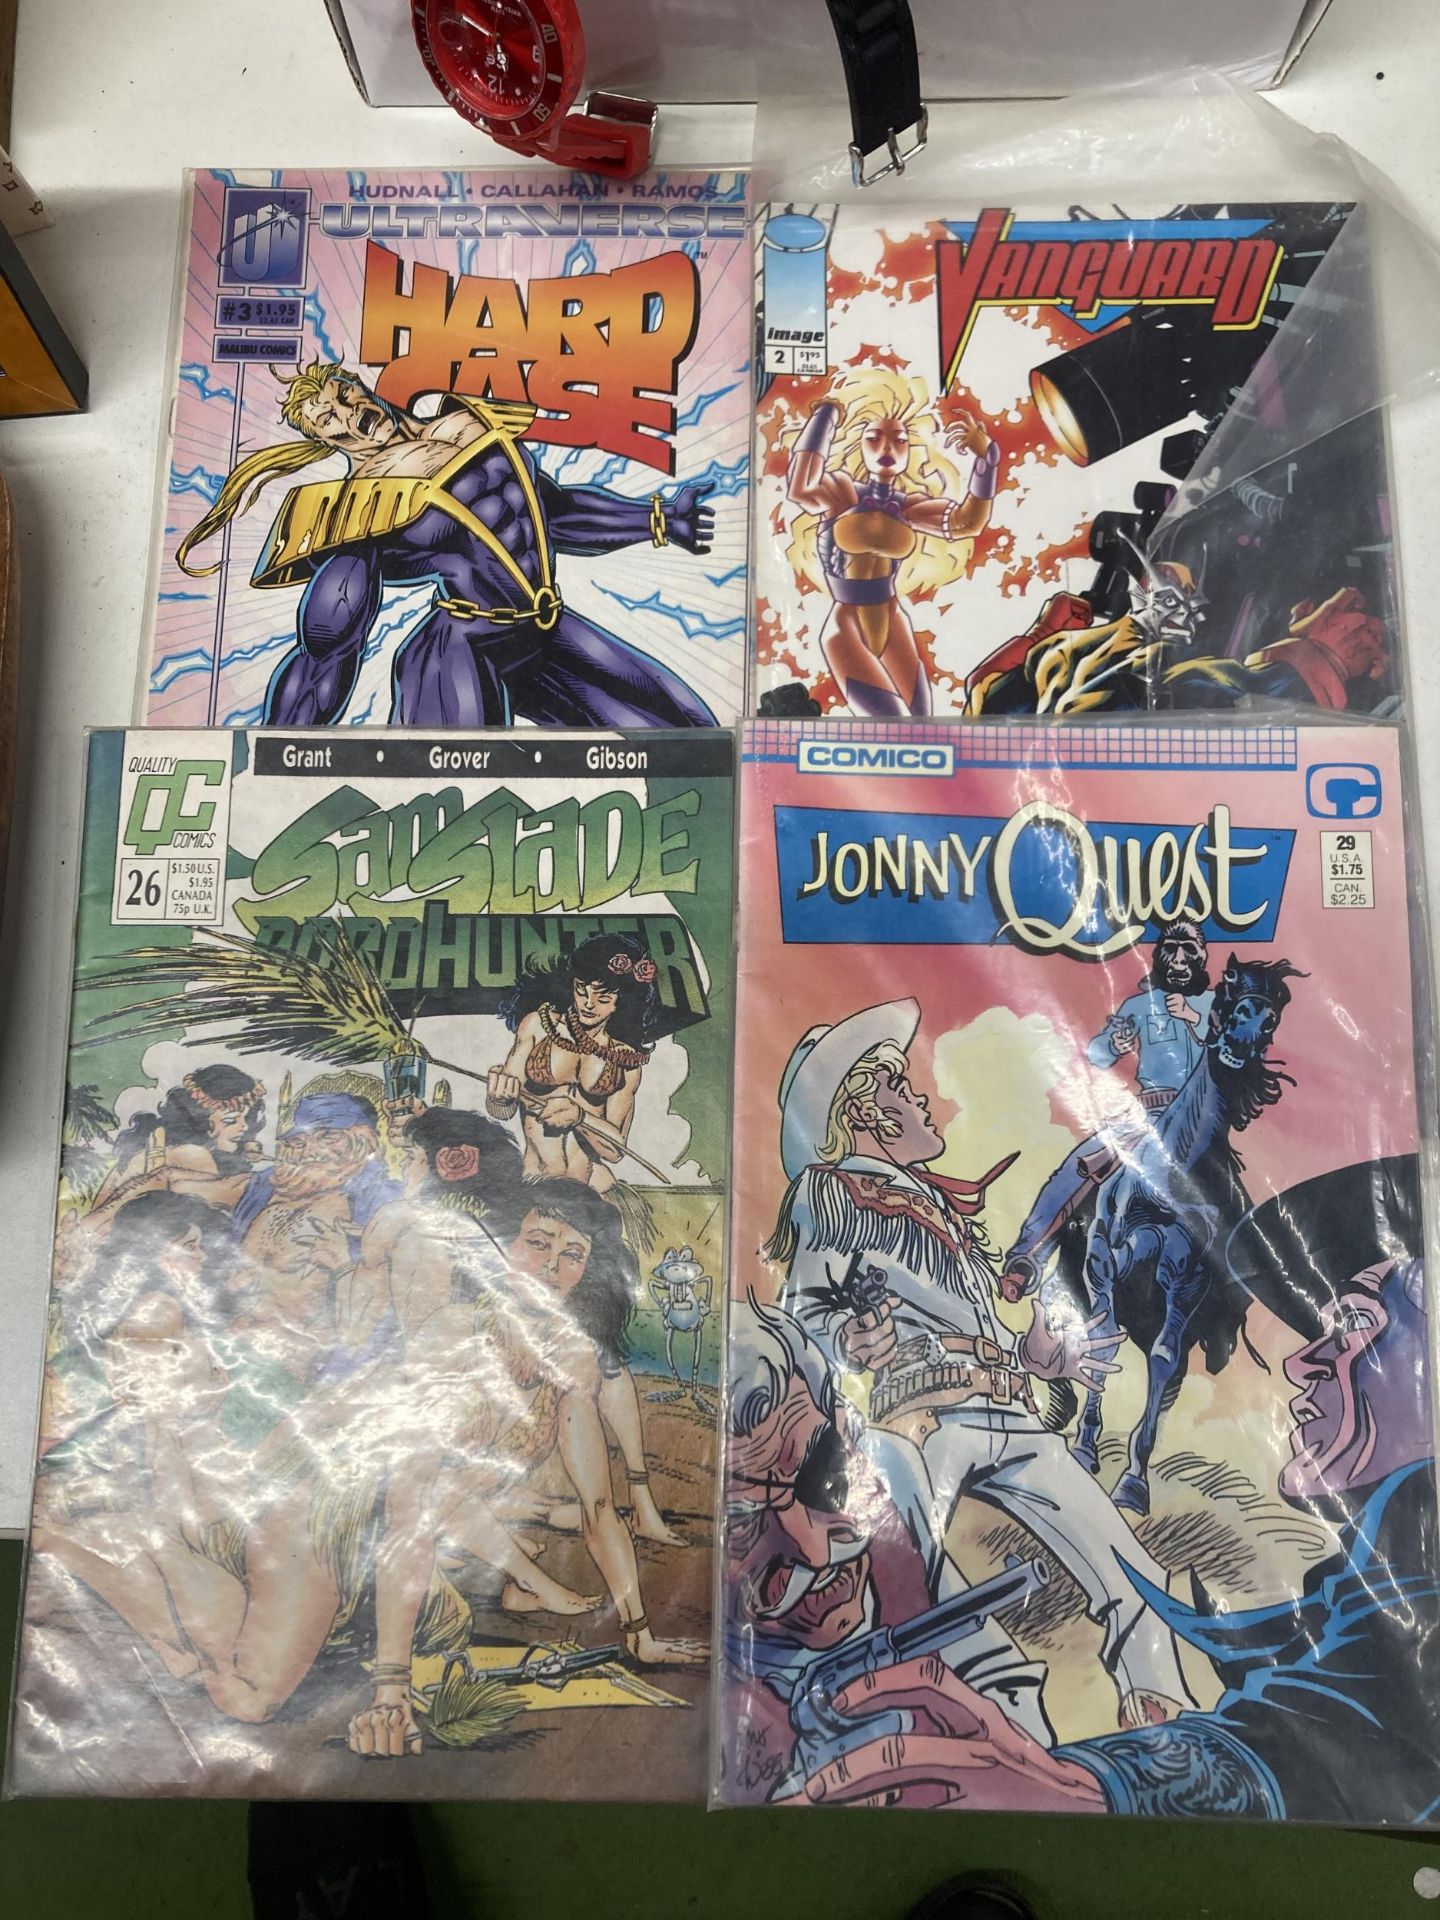 A COLLECTION OF FOUR VINTAGE COMICS TO INCLUDE SAMSLADE, JONNY QUEST,HARD CASE AND VANGUARD